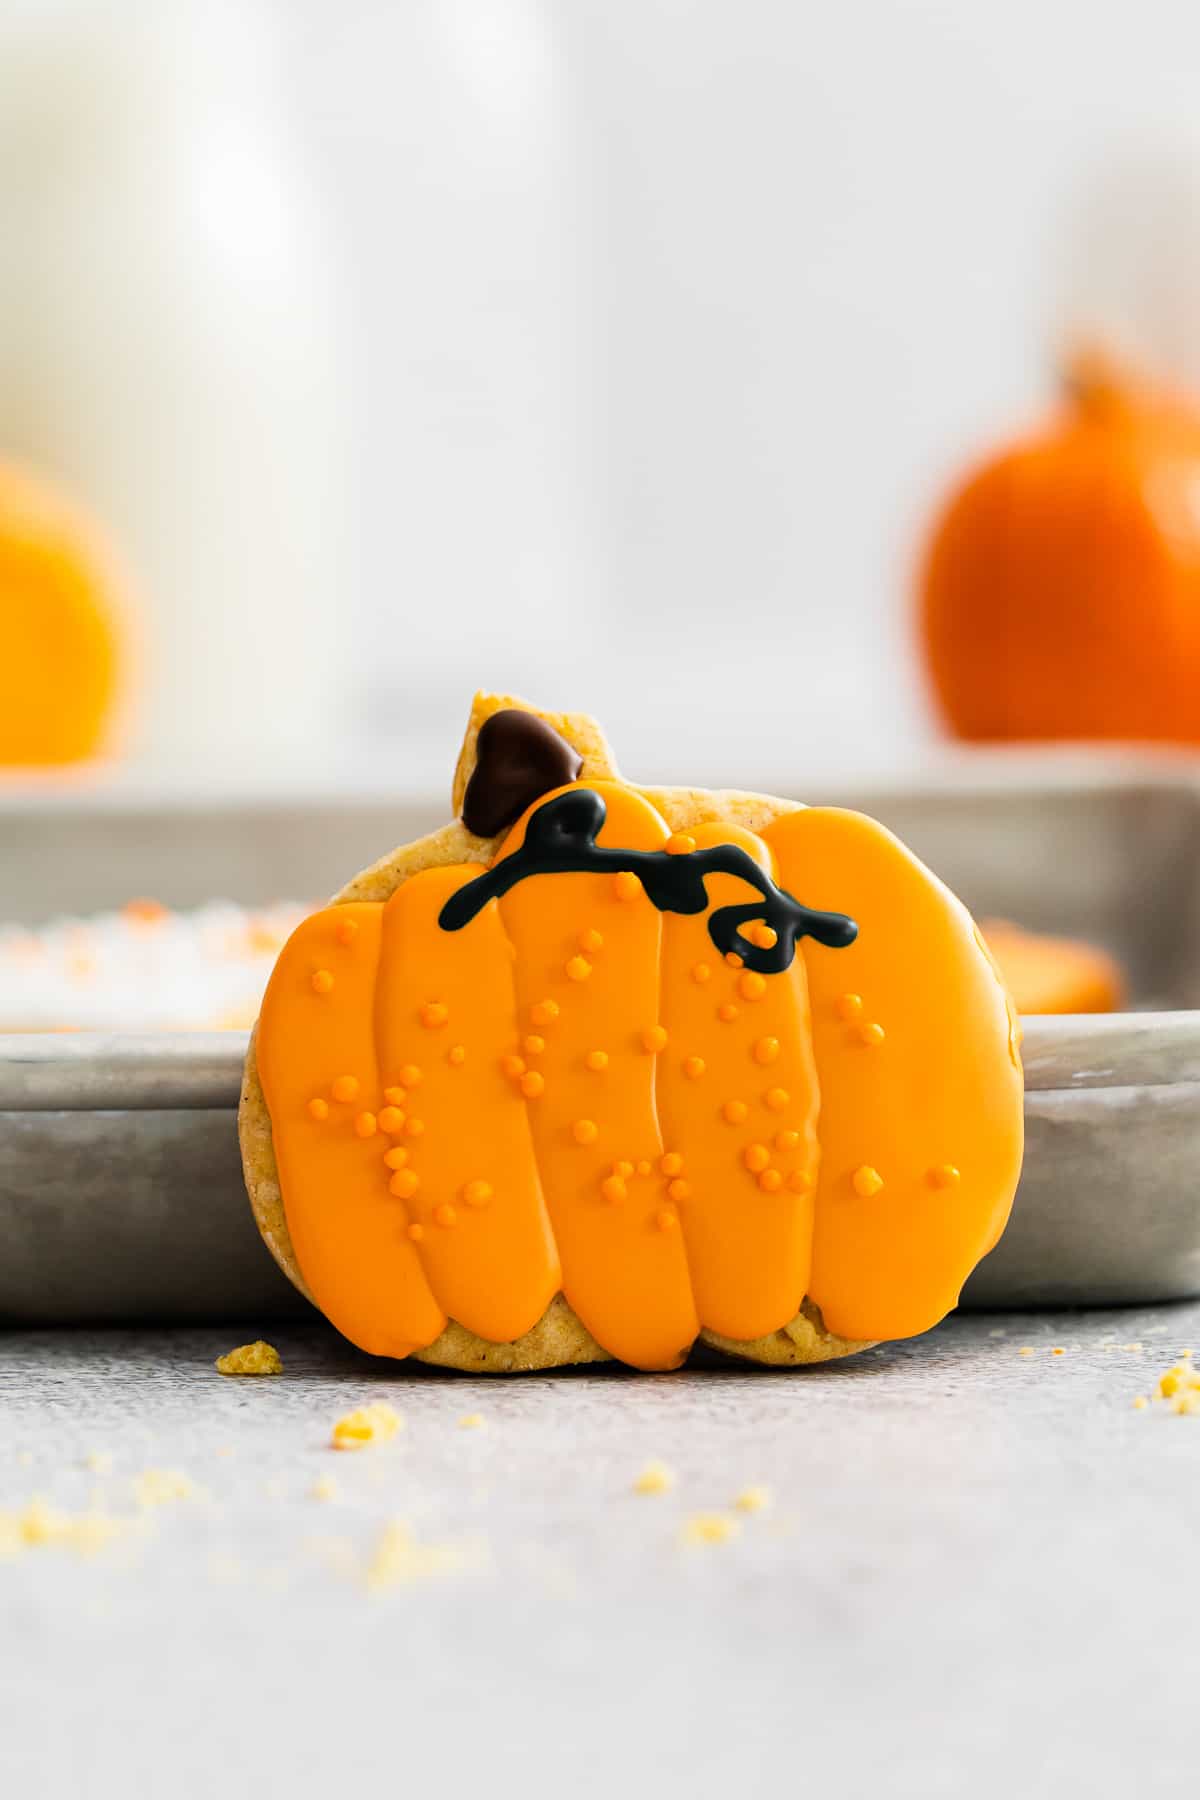 a sugar cookie decorated like a pumpkin with orange frosting